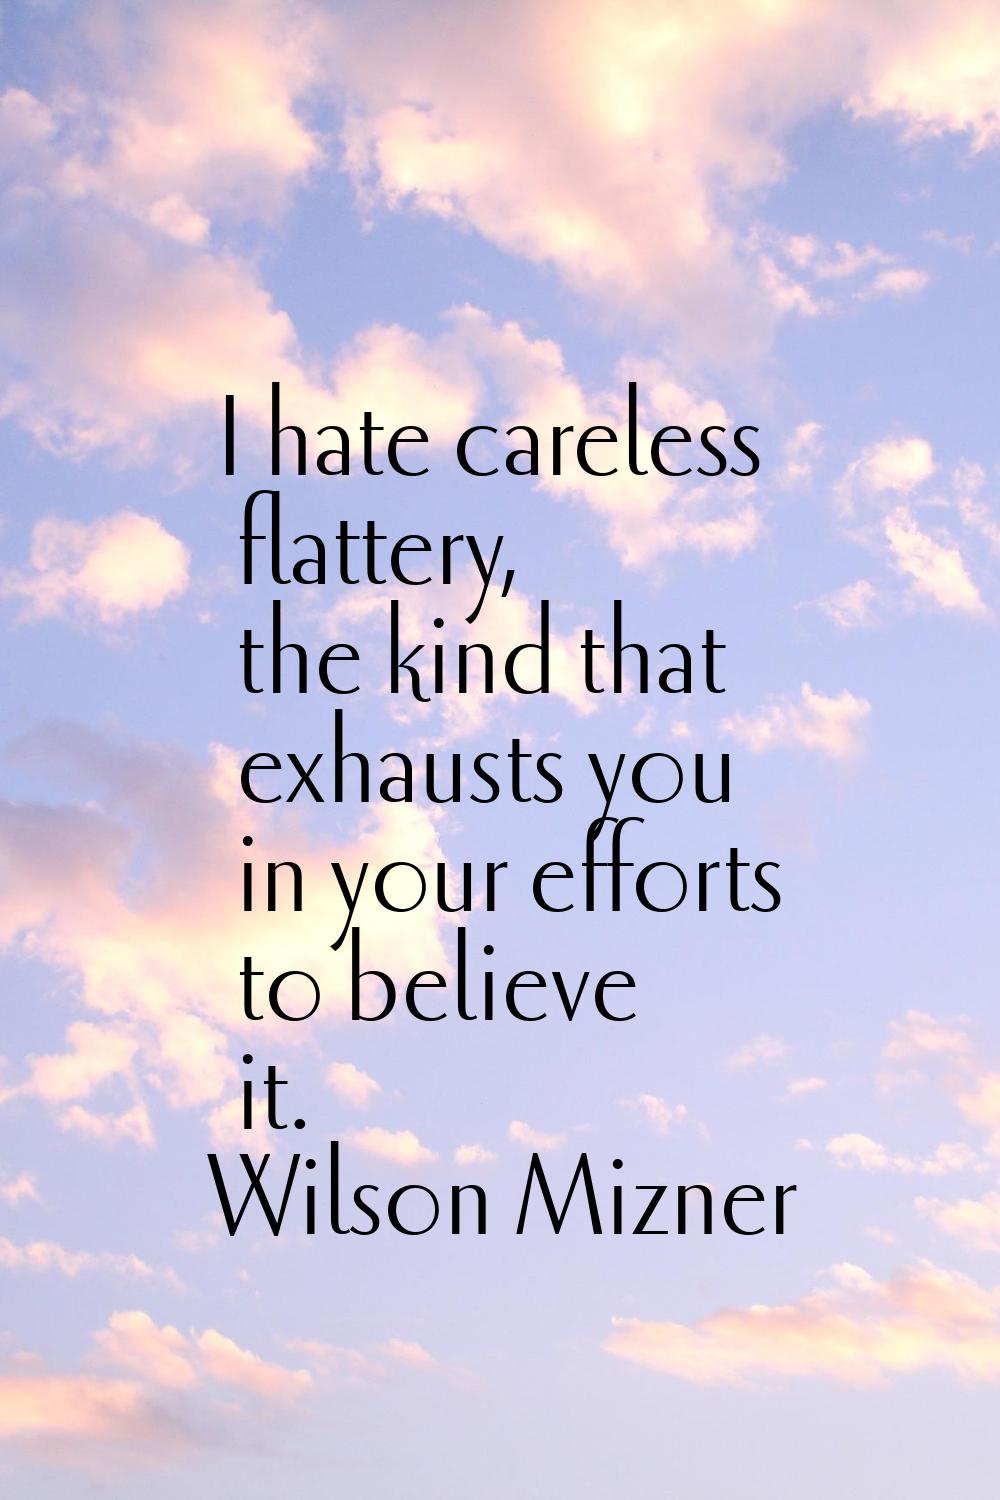 I hate careless flattery, the kind that exhausts you in your efforts to believe it.